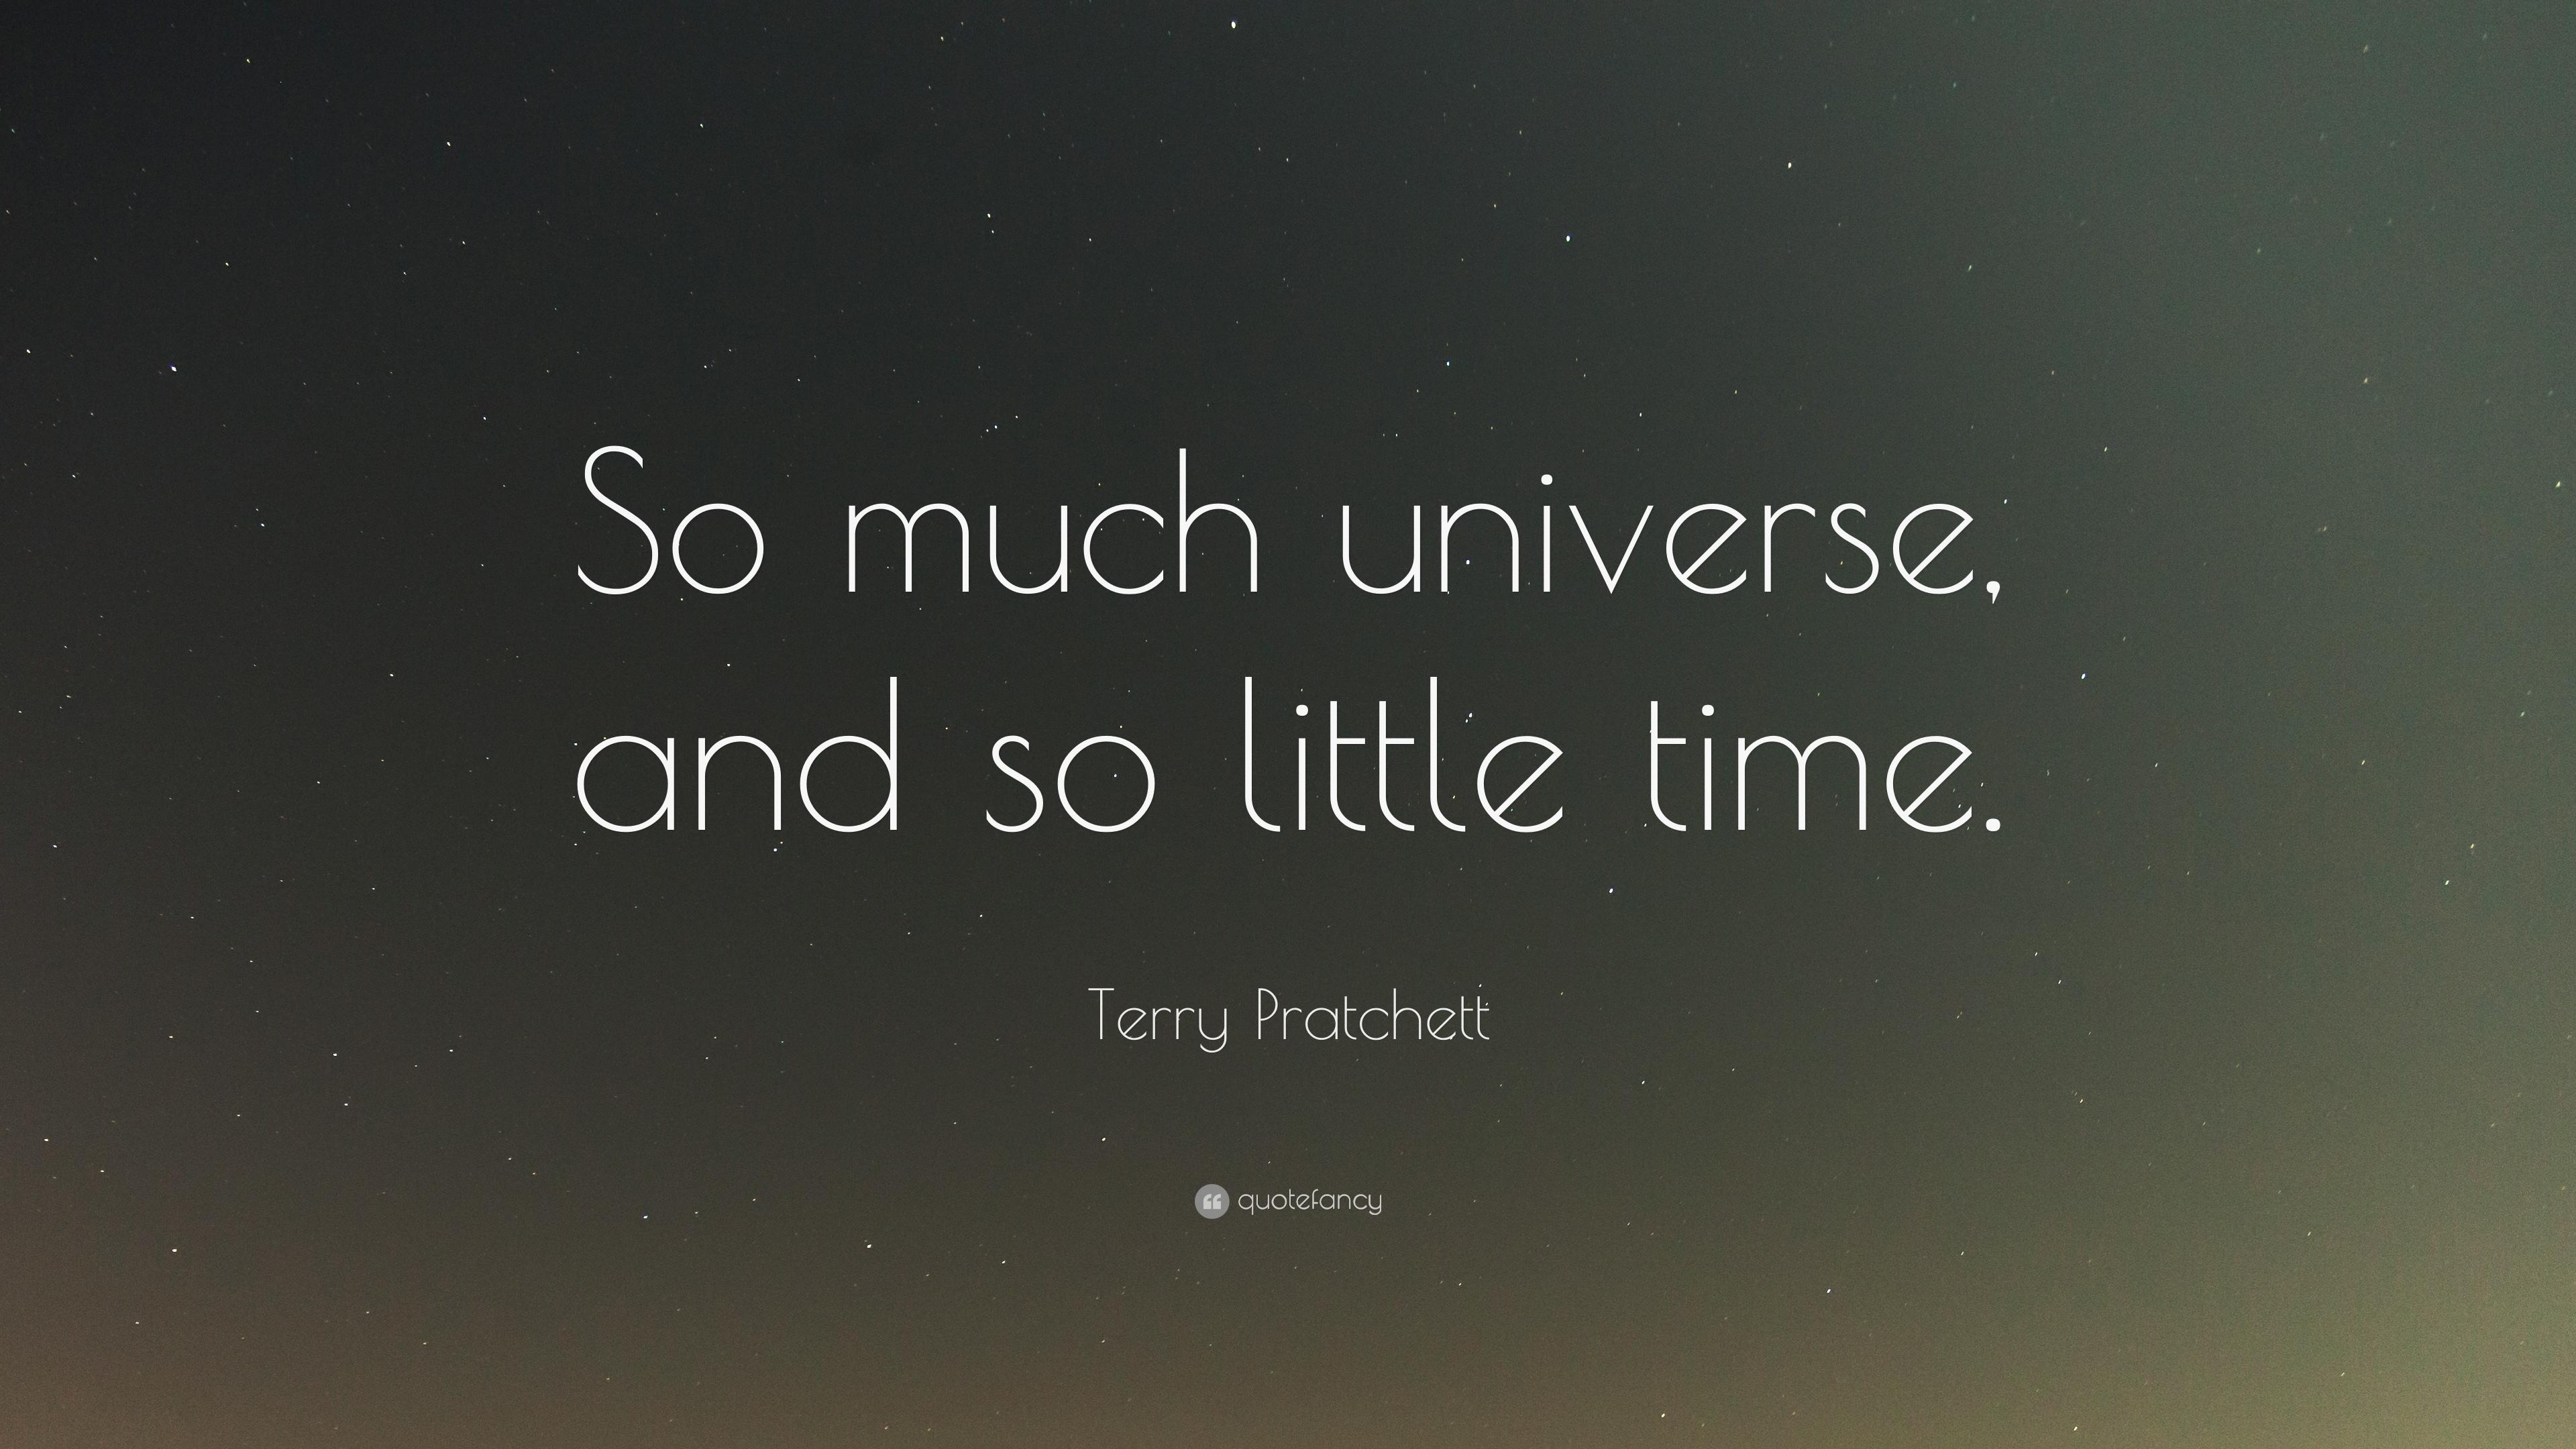 Terry Pratchett Quote: “So much universe, and so little time